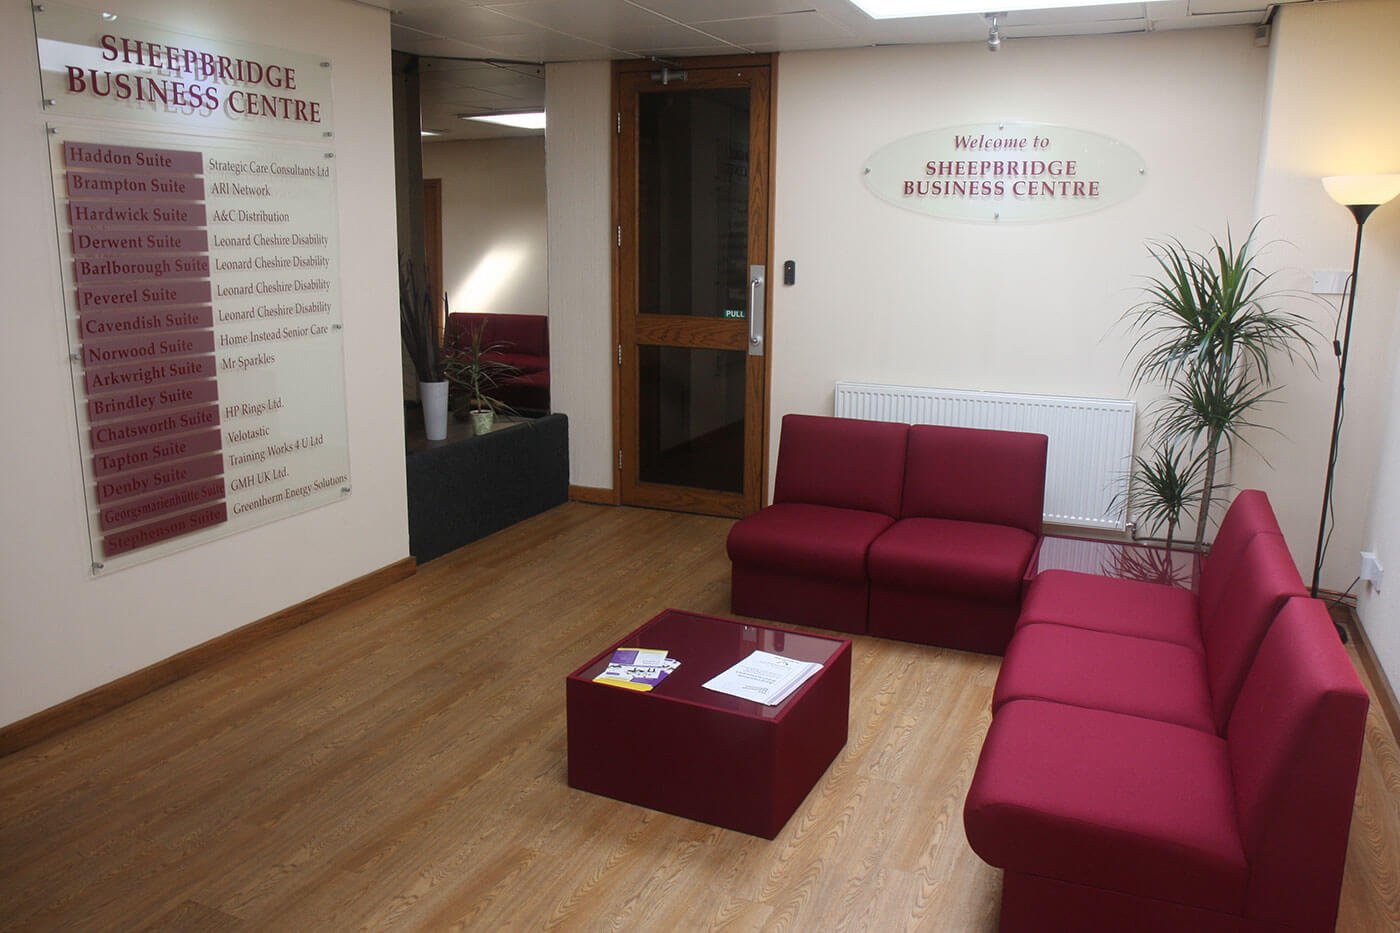 Photo of office reception area